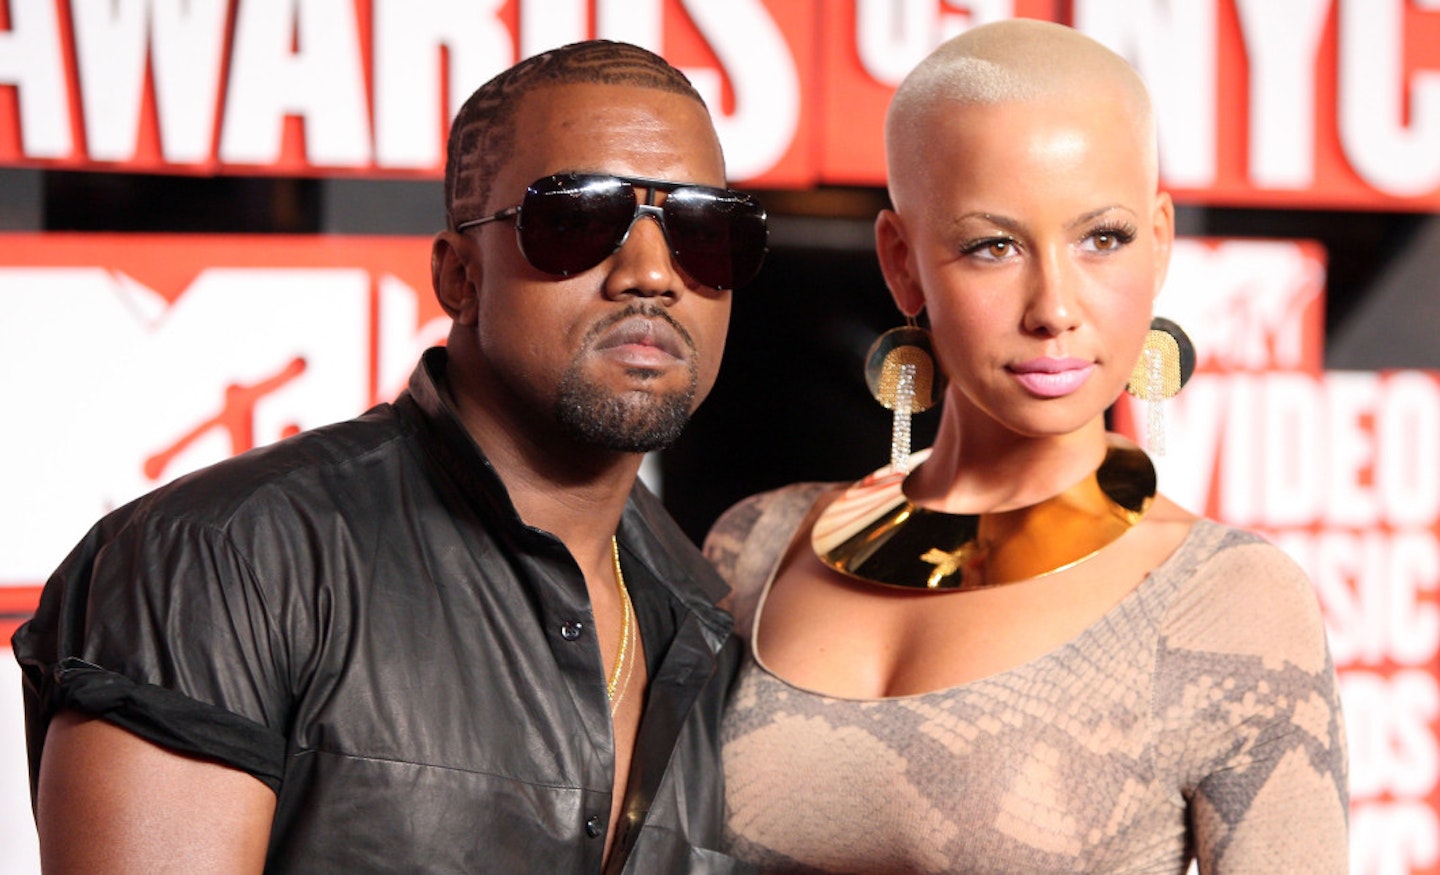 Kanye West and Amber Rose at the 2009 MTV Video Music Awards (Getty)